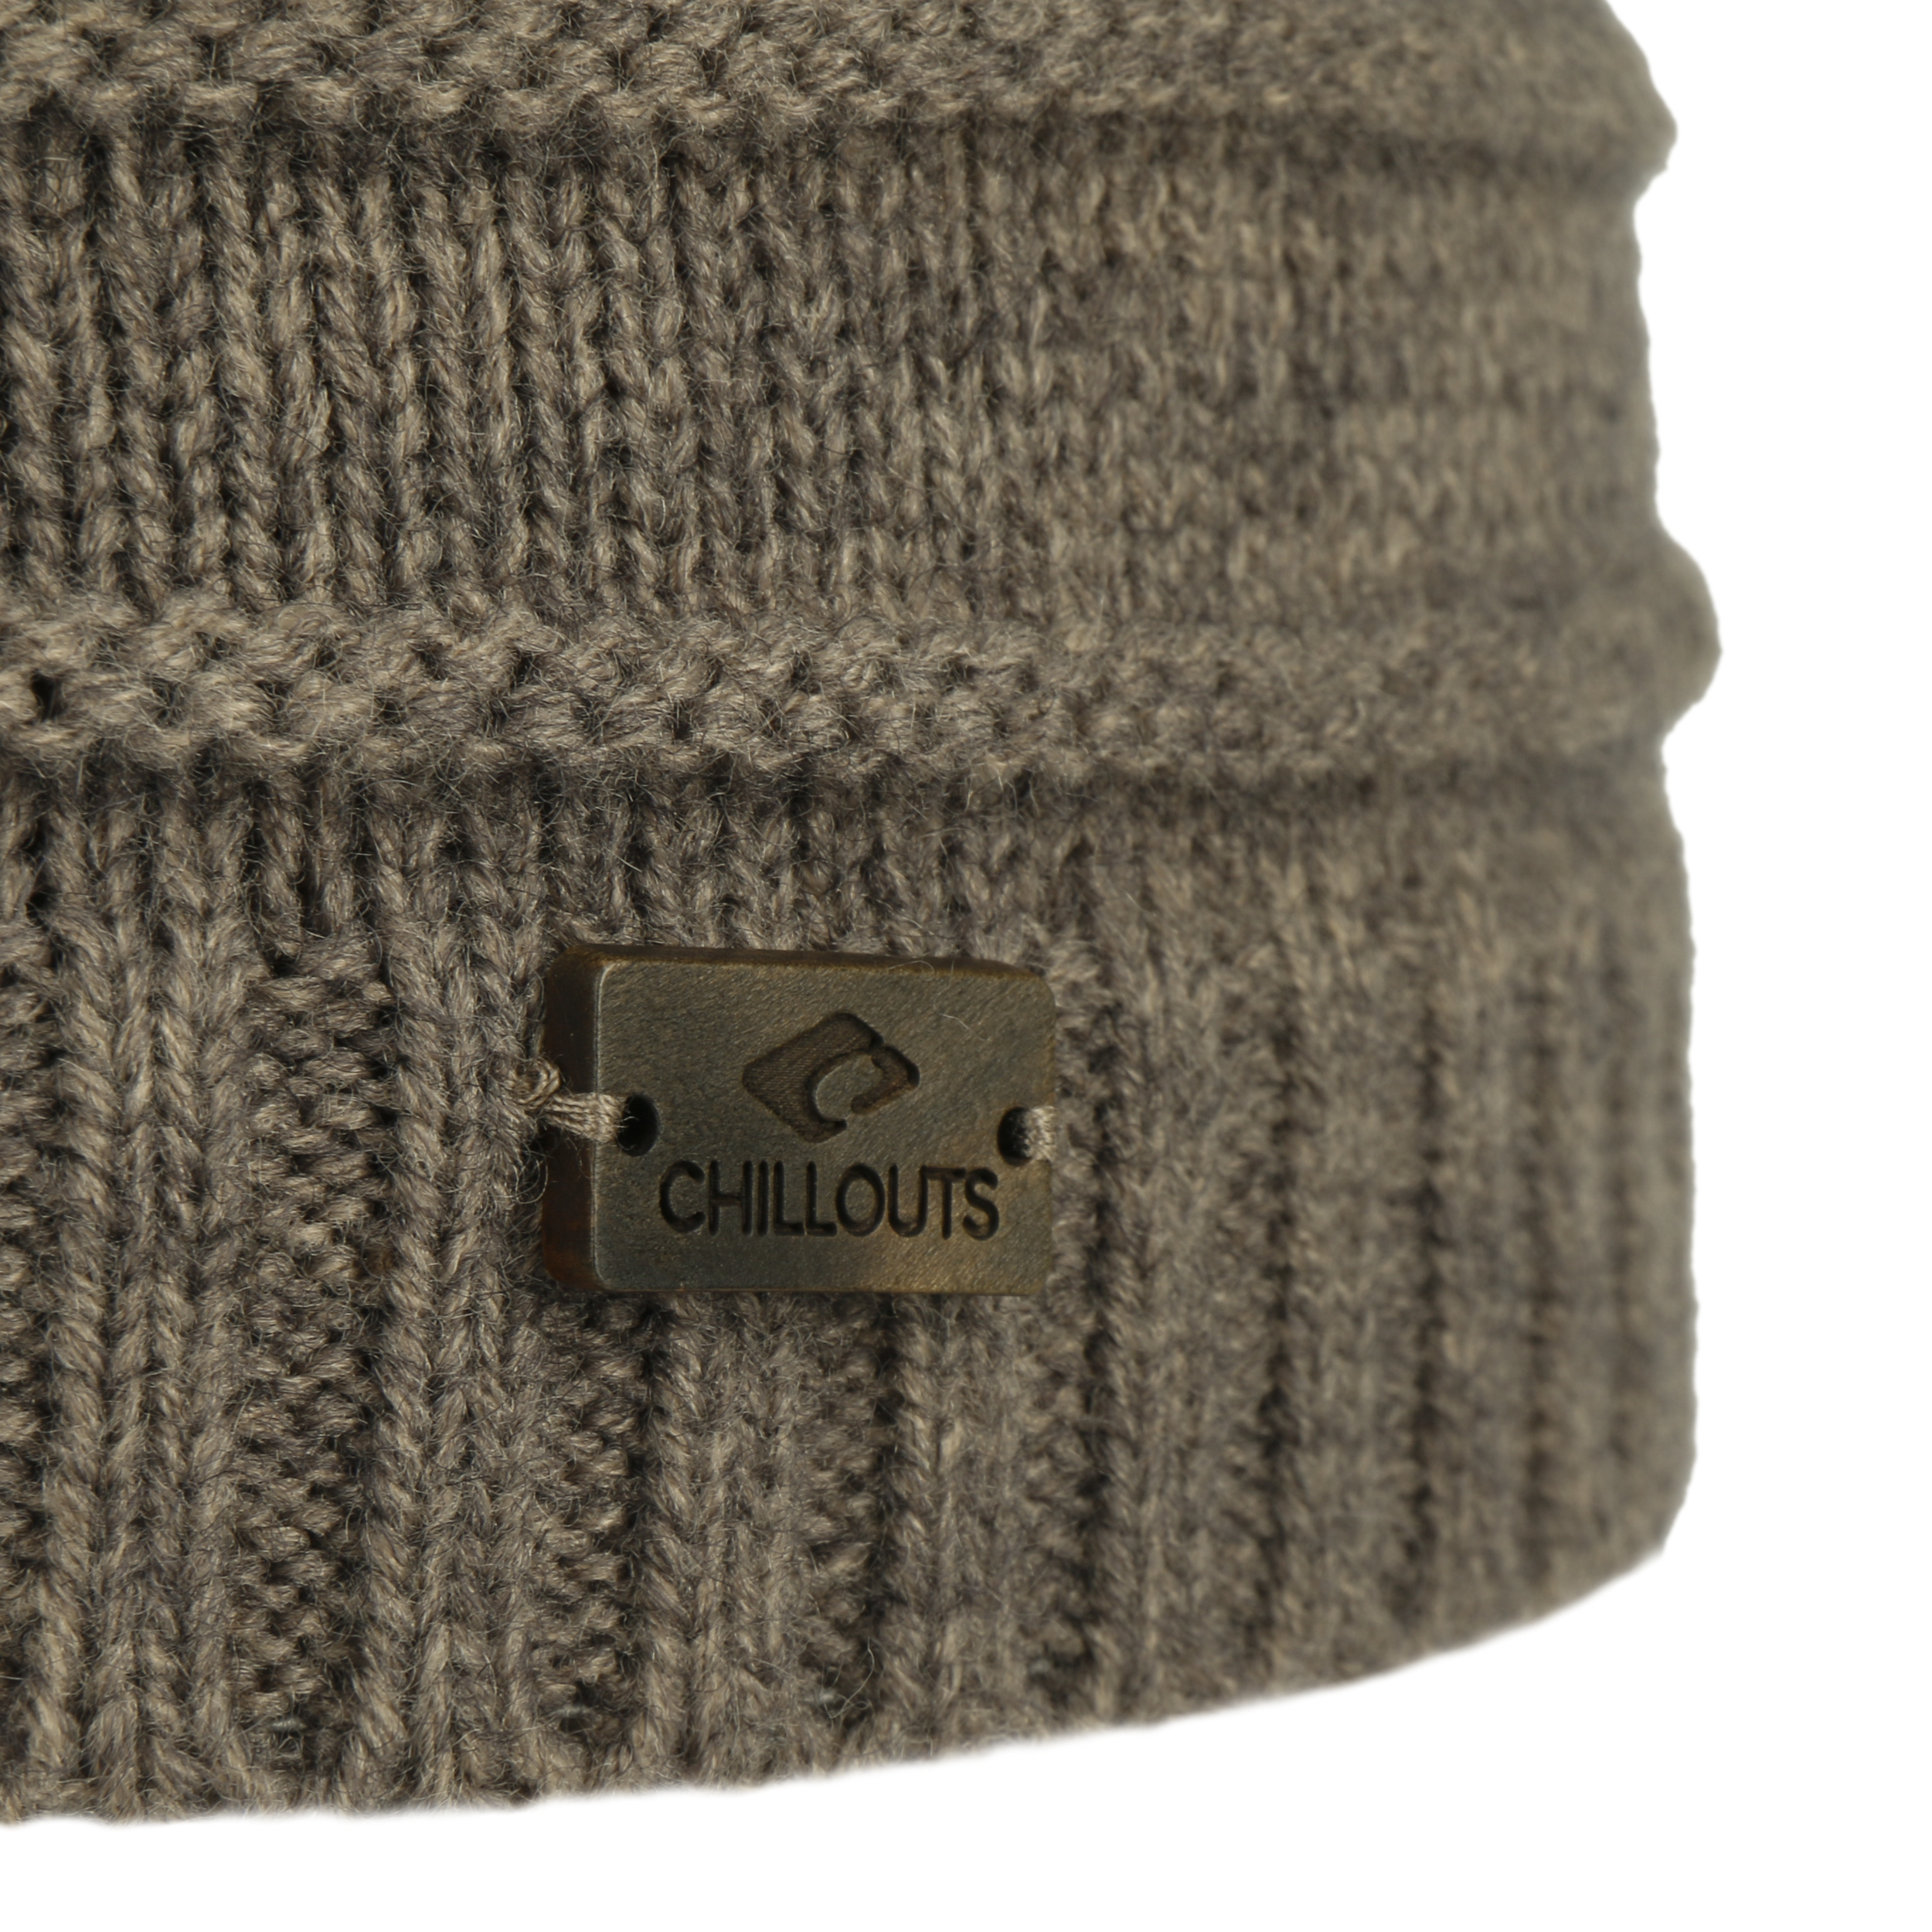 € Arne Chillouts 26,95 - Beanie Hat by